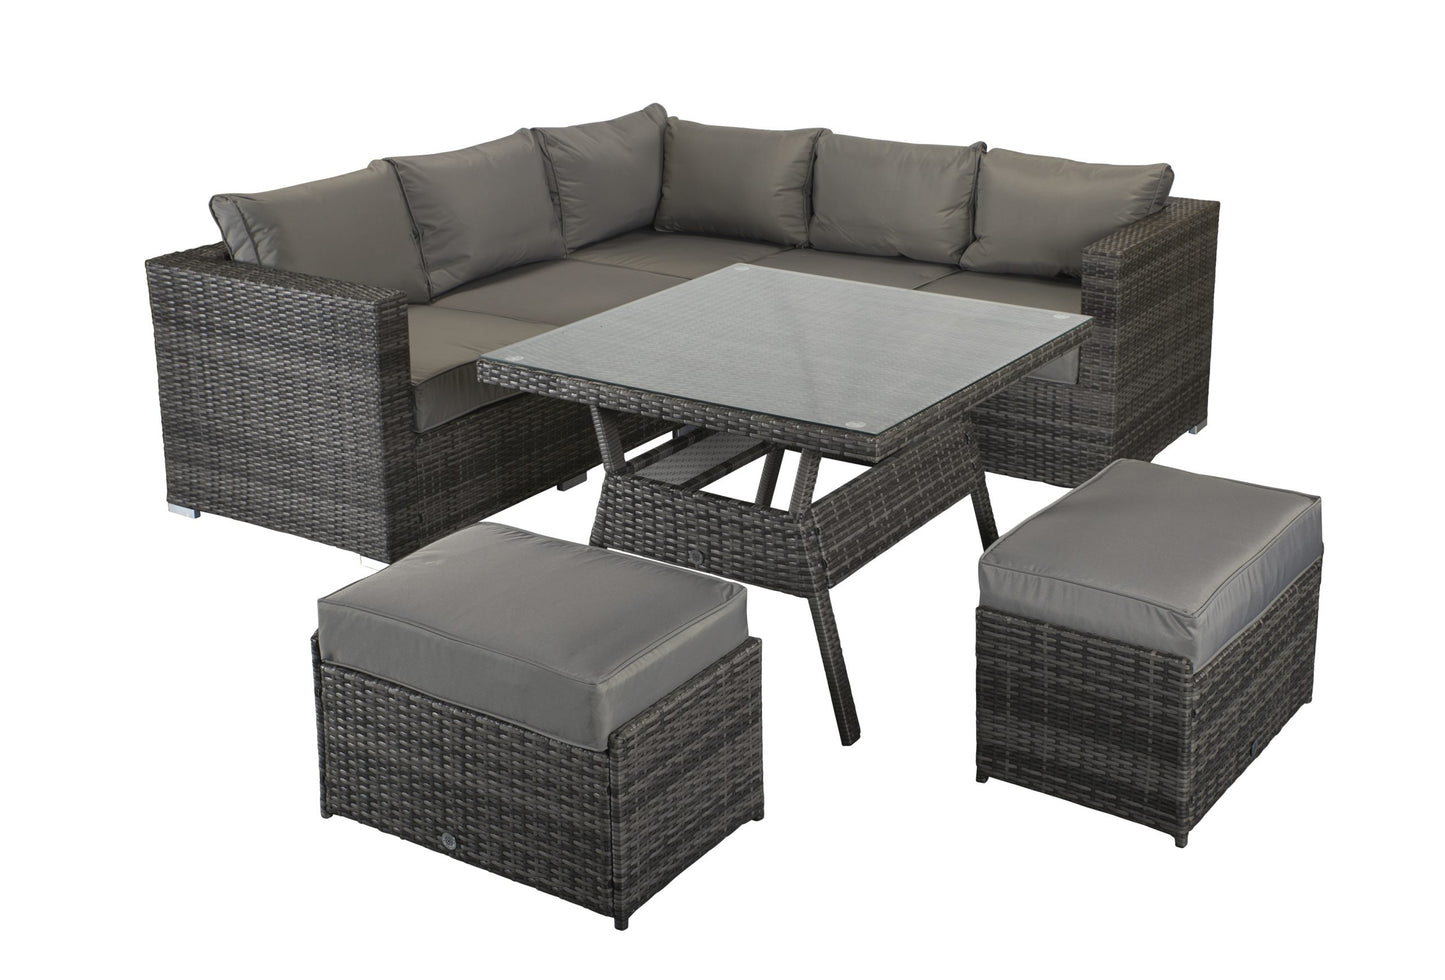 Georgia Rattan Corner Dining Set with Benches in Grey | Geor0150